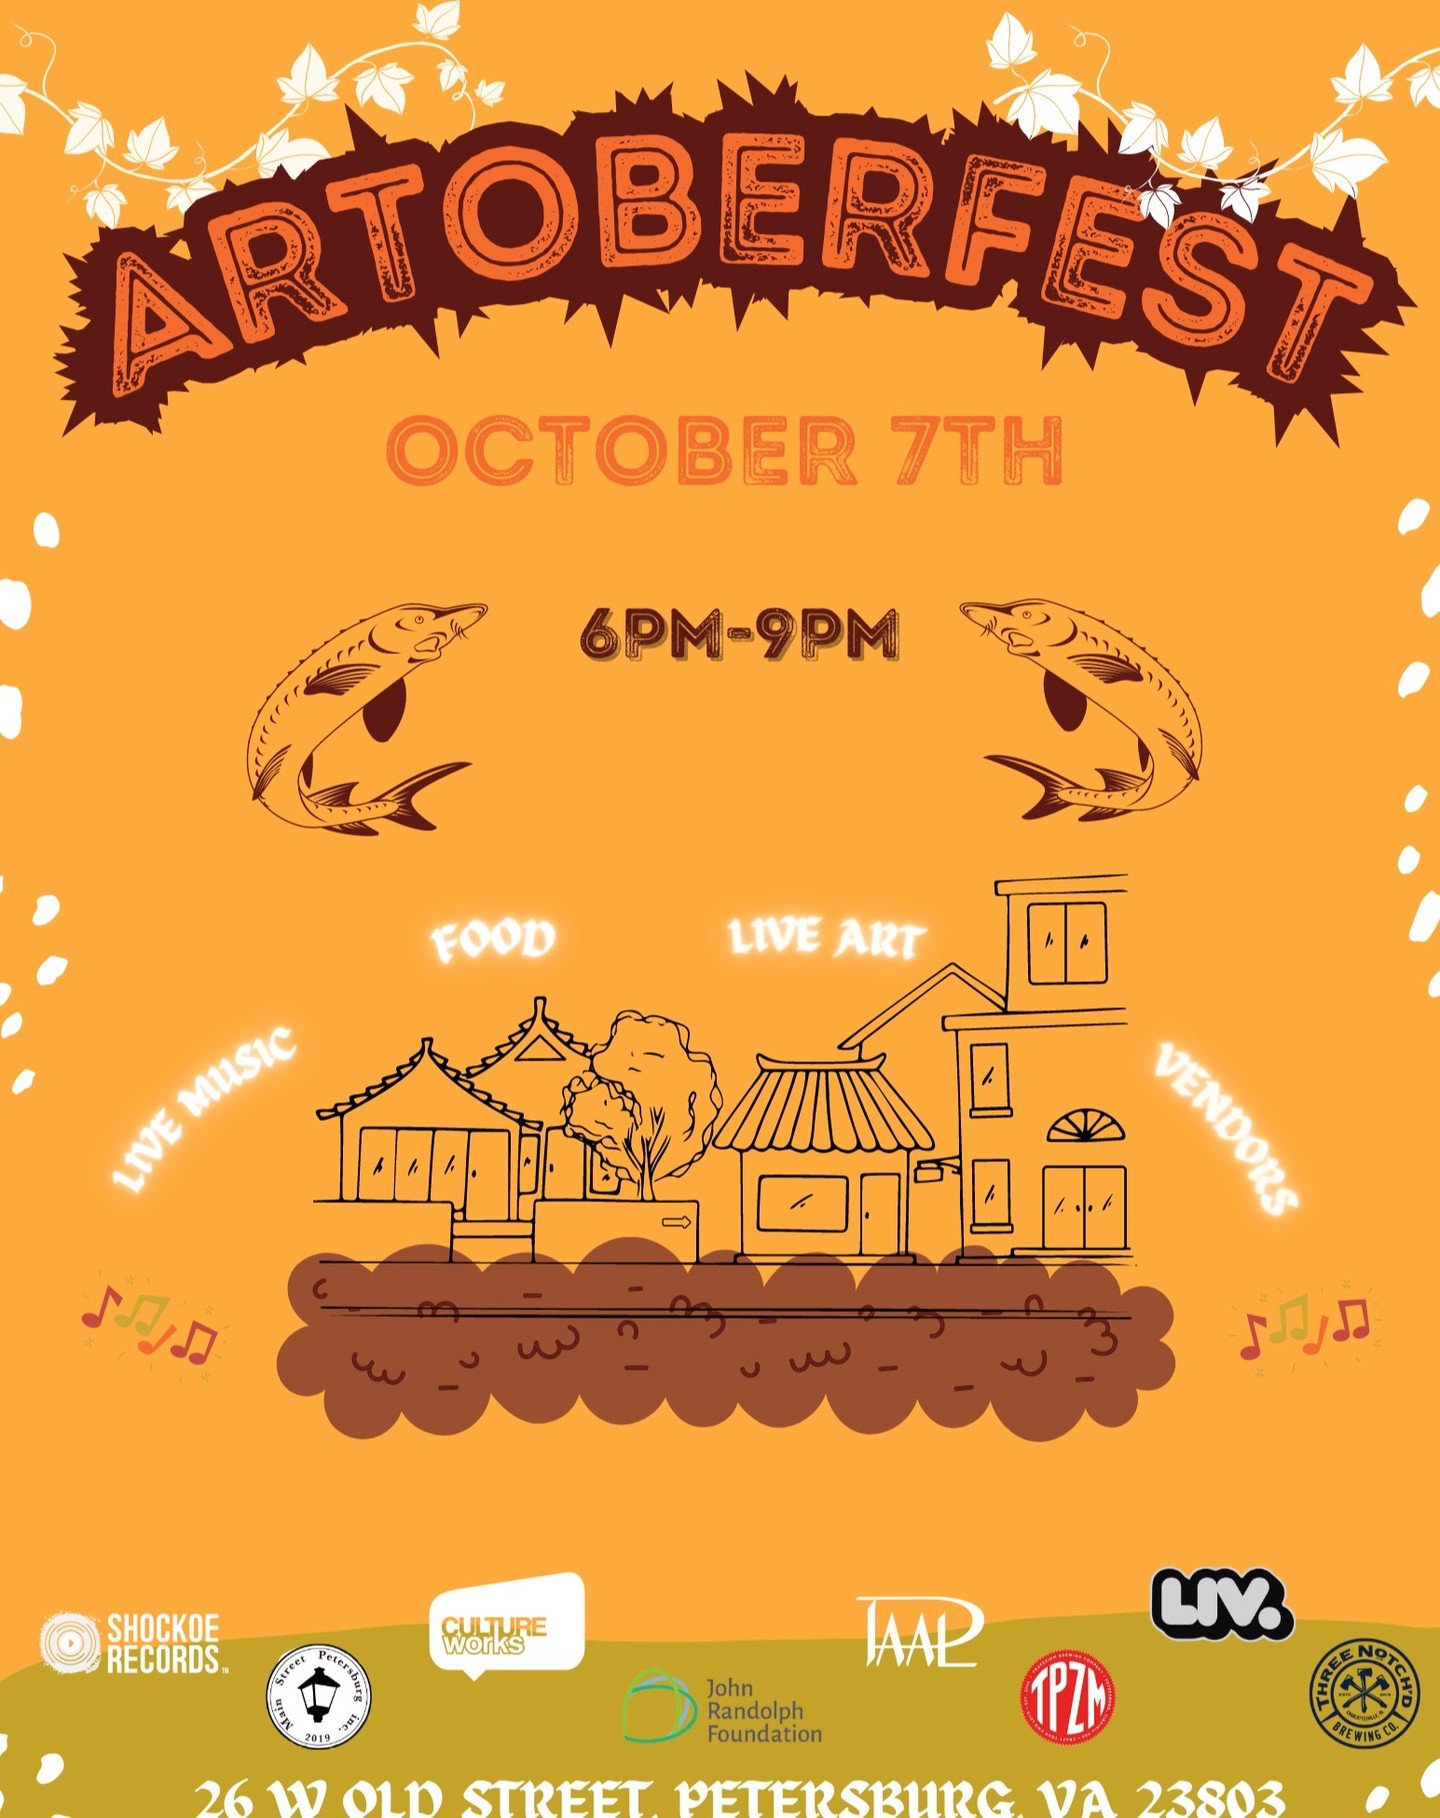 Join us for the 2nd Annual Artoberfest in Petersburg, Virginia, Saturday October 7th from 6-9 PM at the Appomattox Iron Works! (Rain date 10.21)

26 W Old Street Petersburg, VA 23803

This year sees a host of collaborations bringing you a unique art 